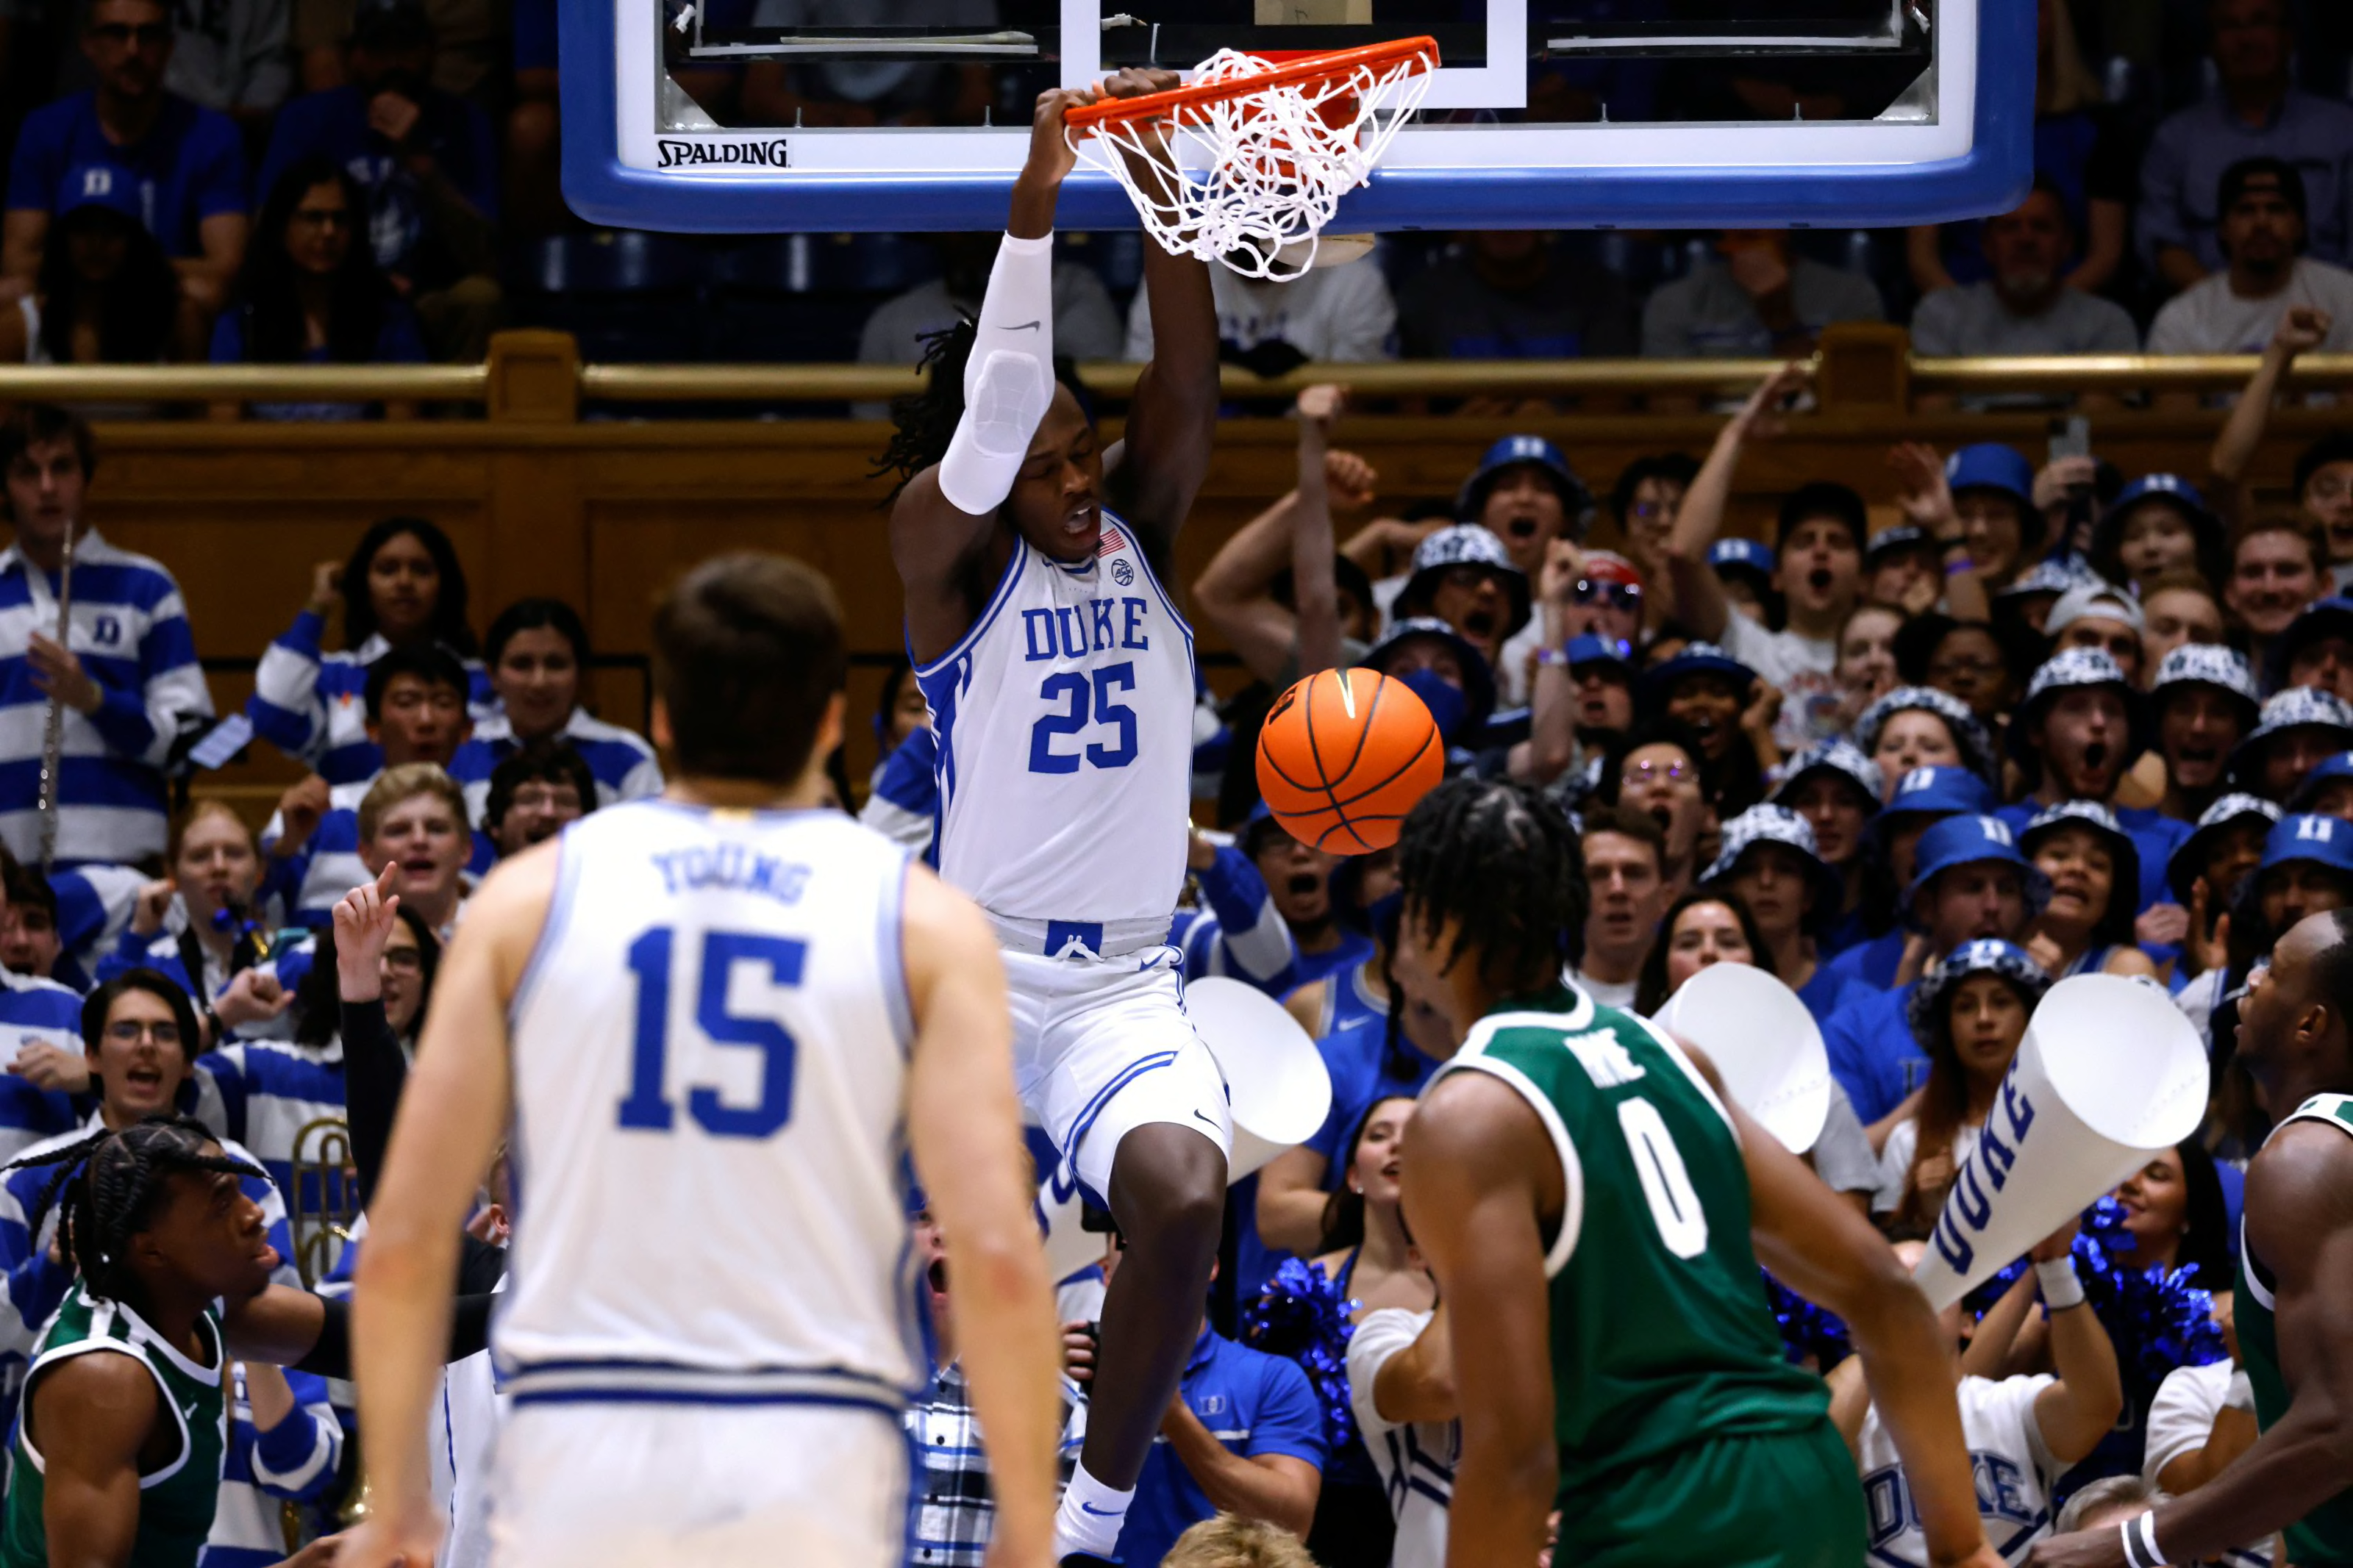 Duke basketball with promising futures after opening night